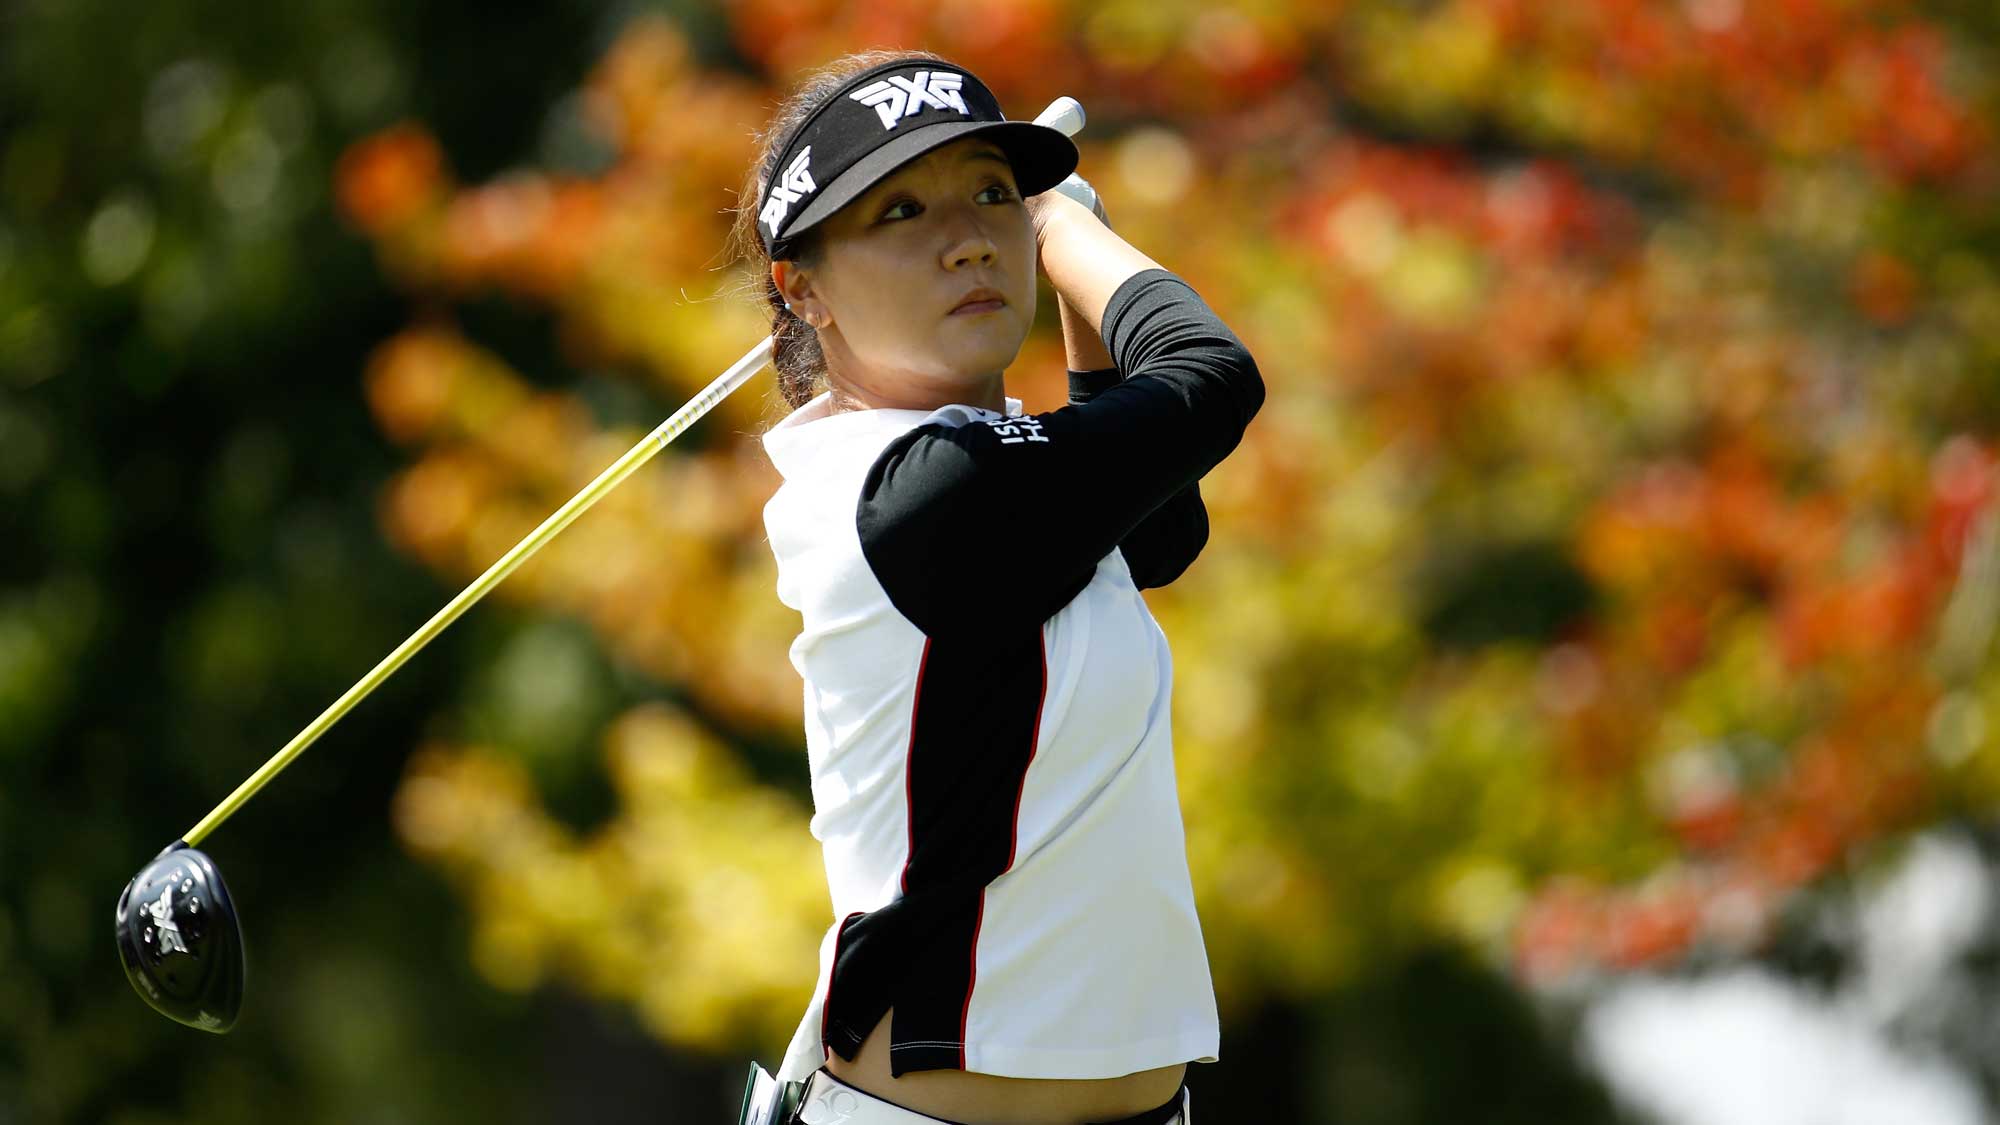 Lydia Ko of New Zealand hits her tee shot ont he 9th hole during the final round of the Indy Women In Tech Championship-Presented By Guggenheim